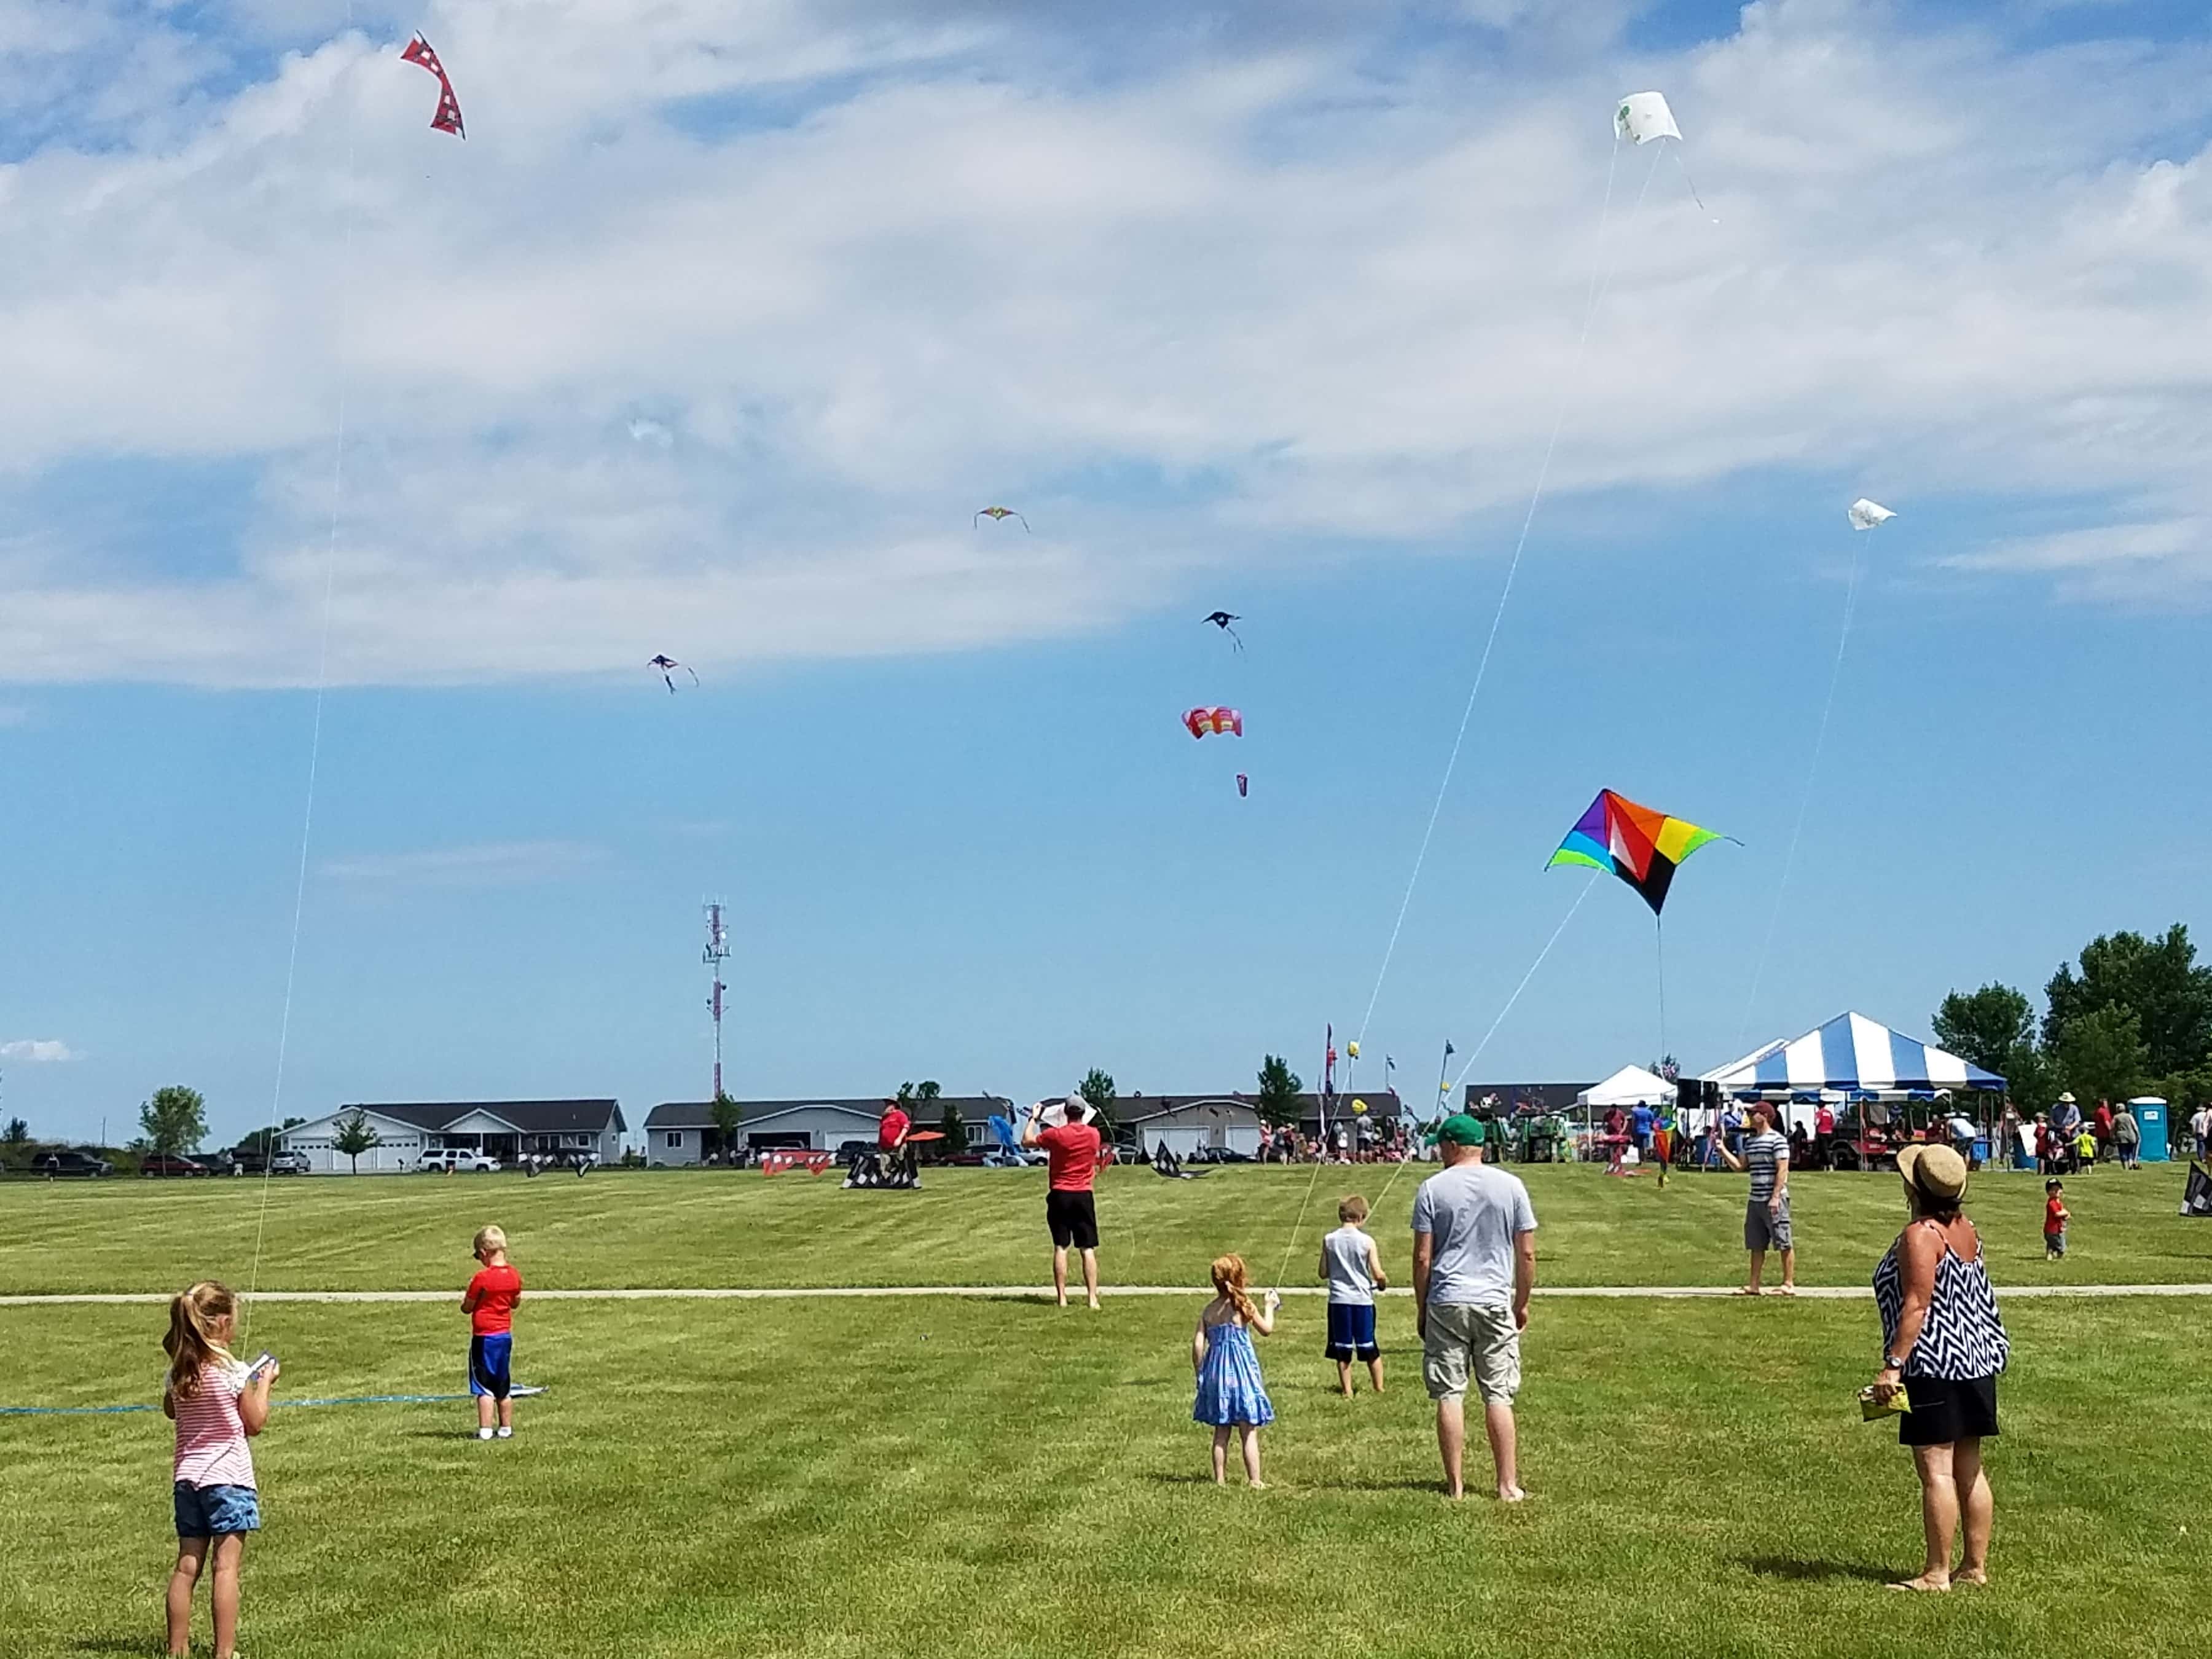 Premiere Midwest Kite Flying Festival Returns for 25th Year in